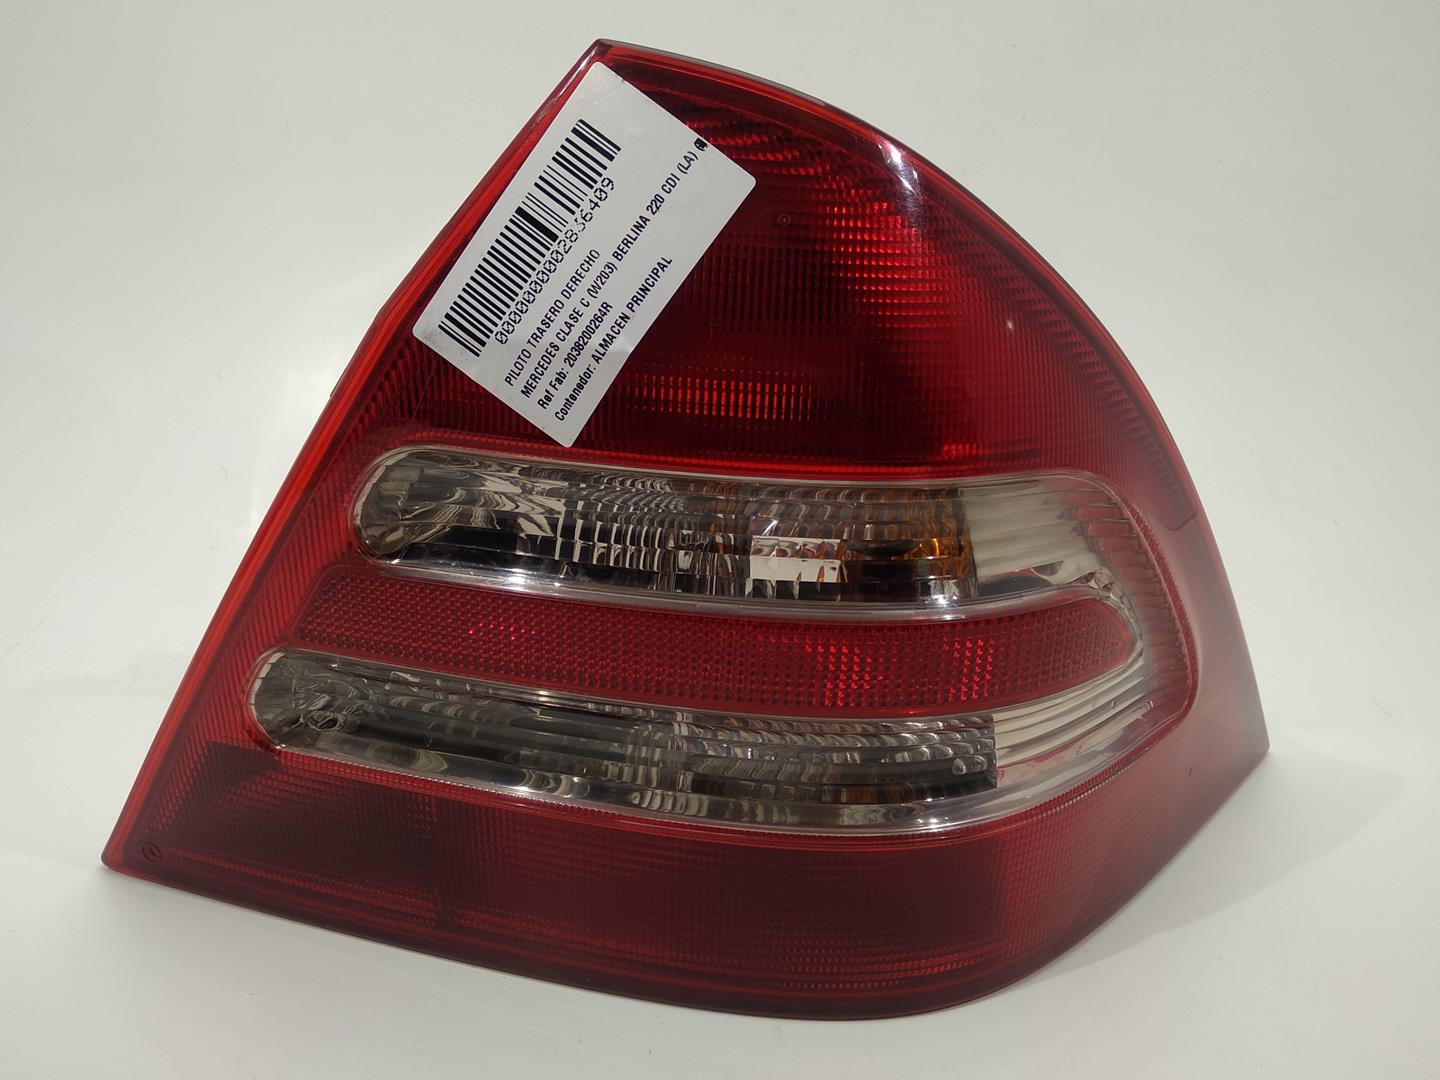 MERCEDES-BENZ C-Class W203/S203/CL203 (2000-2008) Rear Right Taillight Lamp 2038200264R, 2038200264R, 2038200264R 24666128